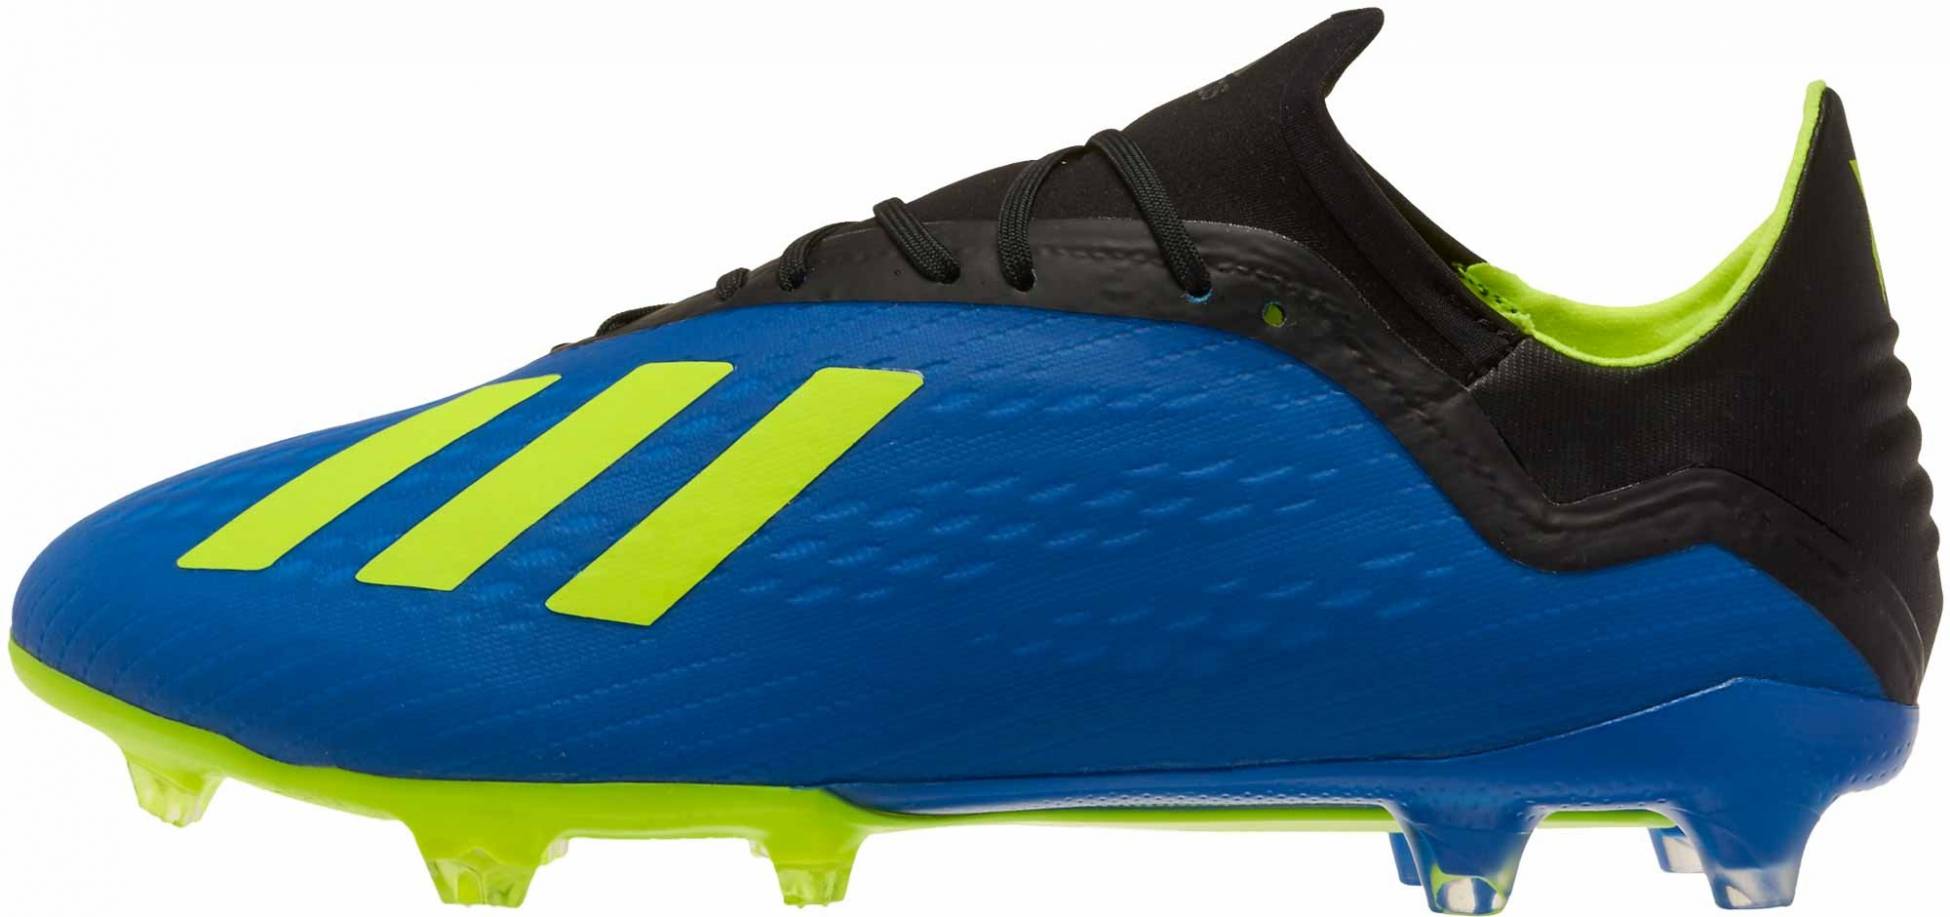 Adidas X 18.2 Firm Ground only $50 + 